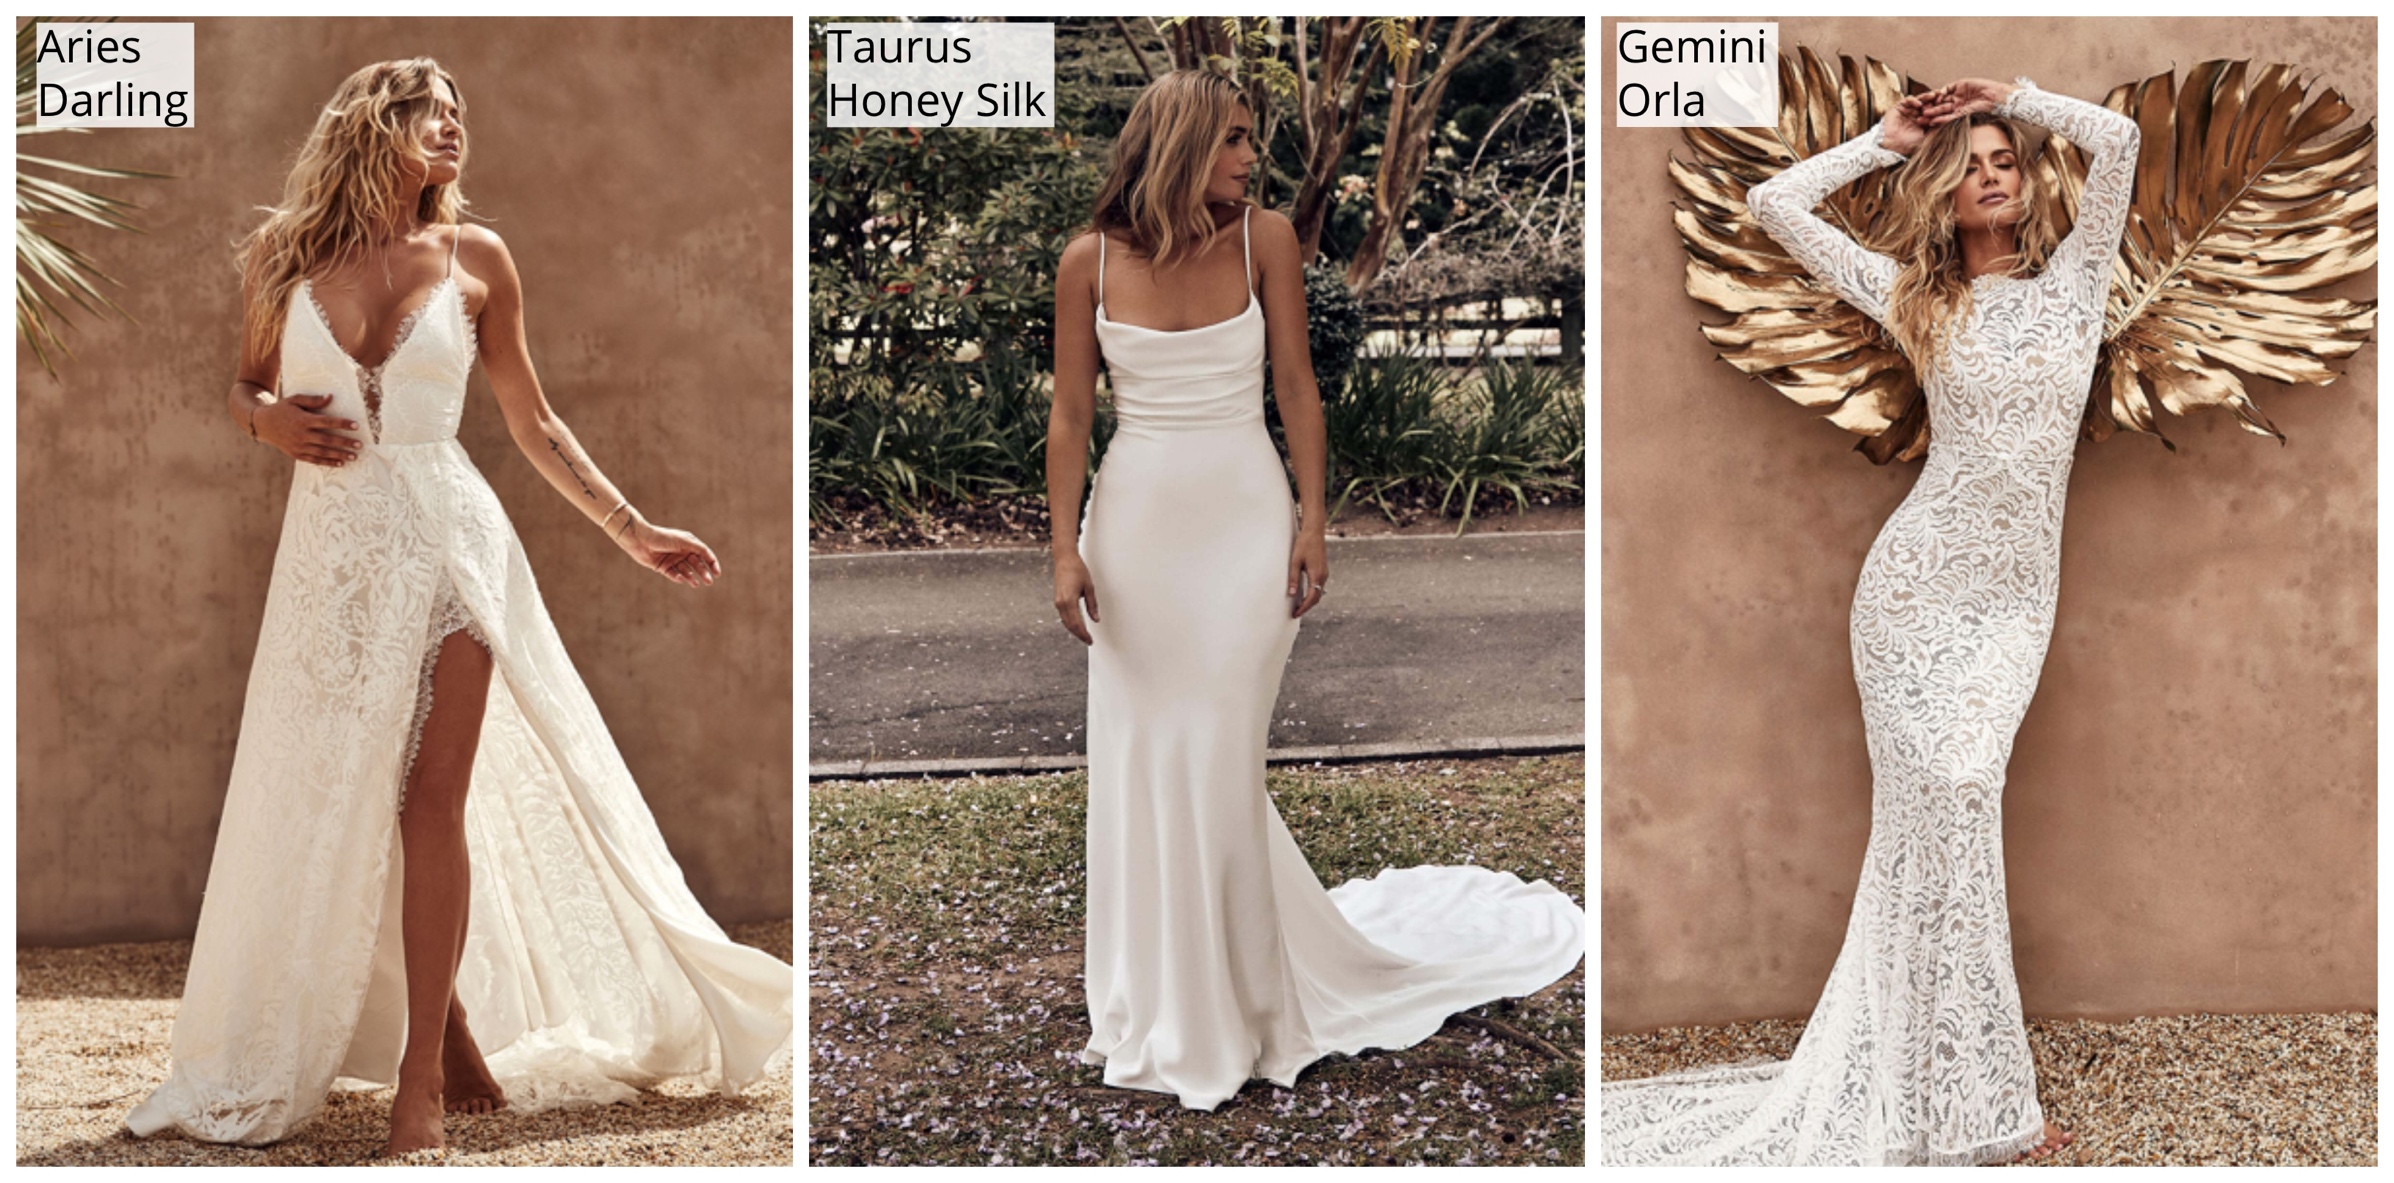 5 Showstopping Backless Wedding Dresses - Pretty Happy Love - Wedding Blog